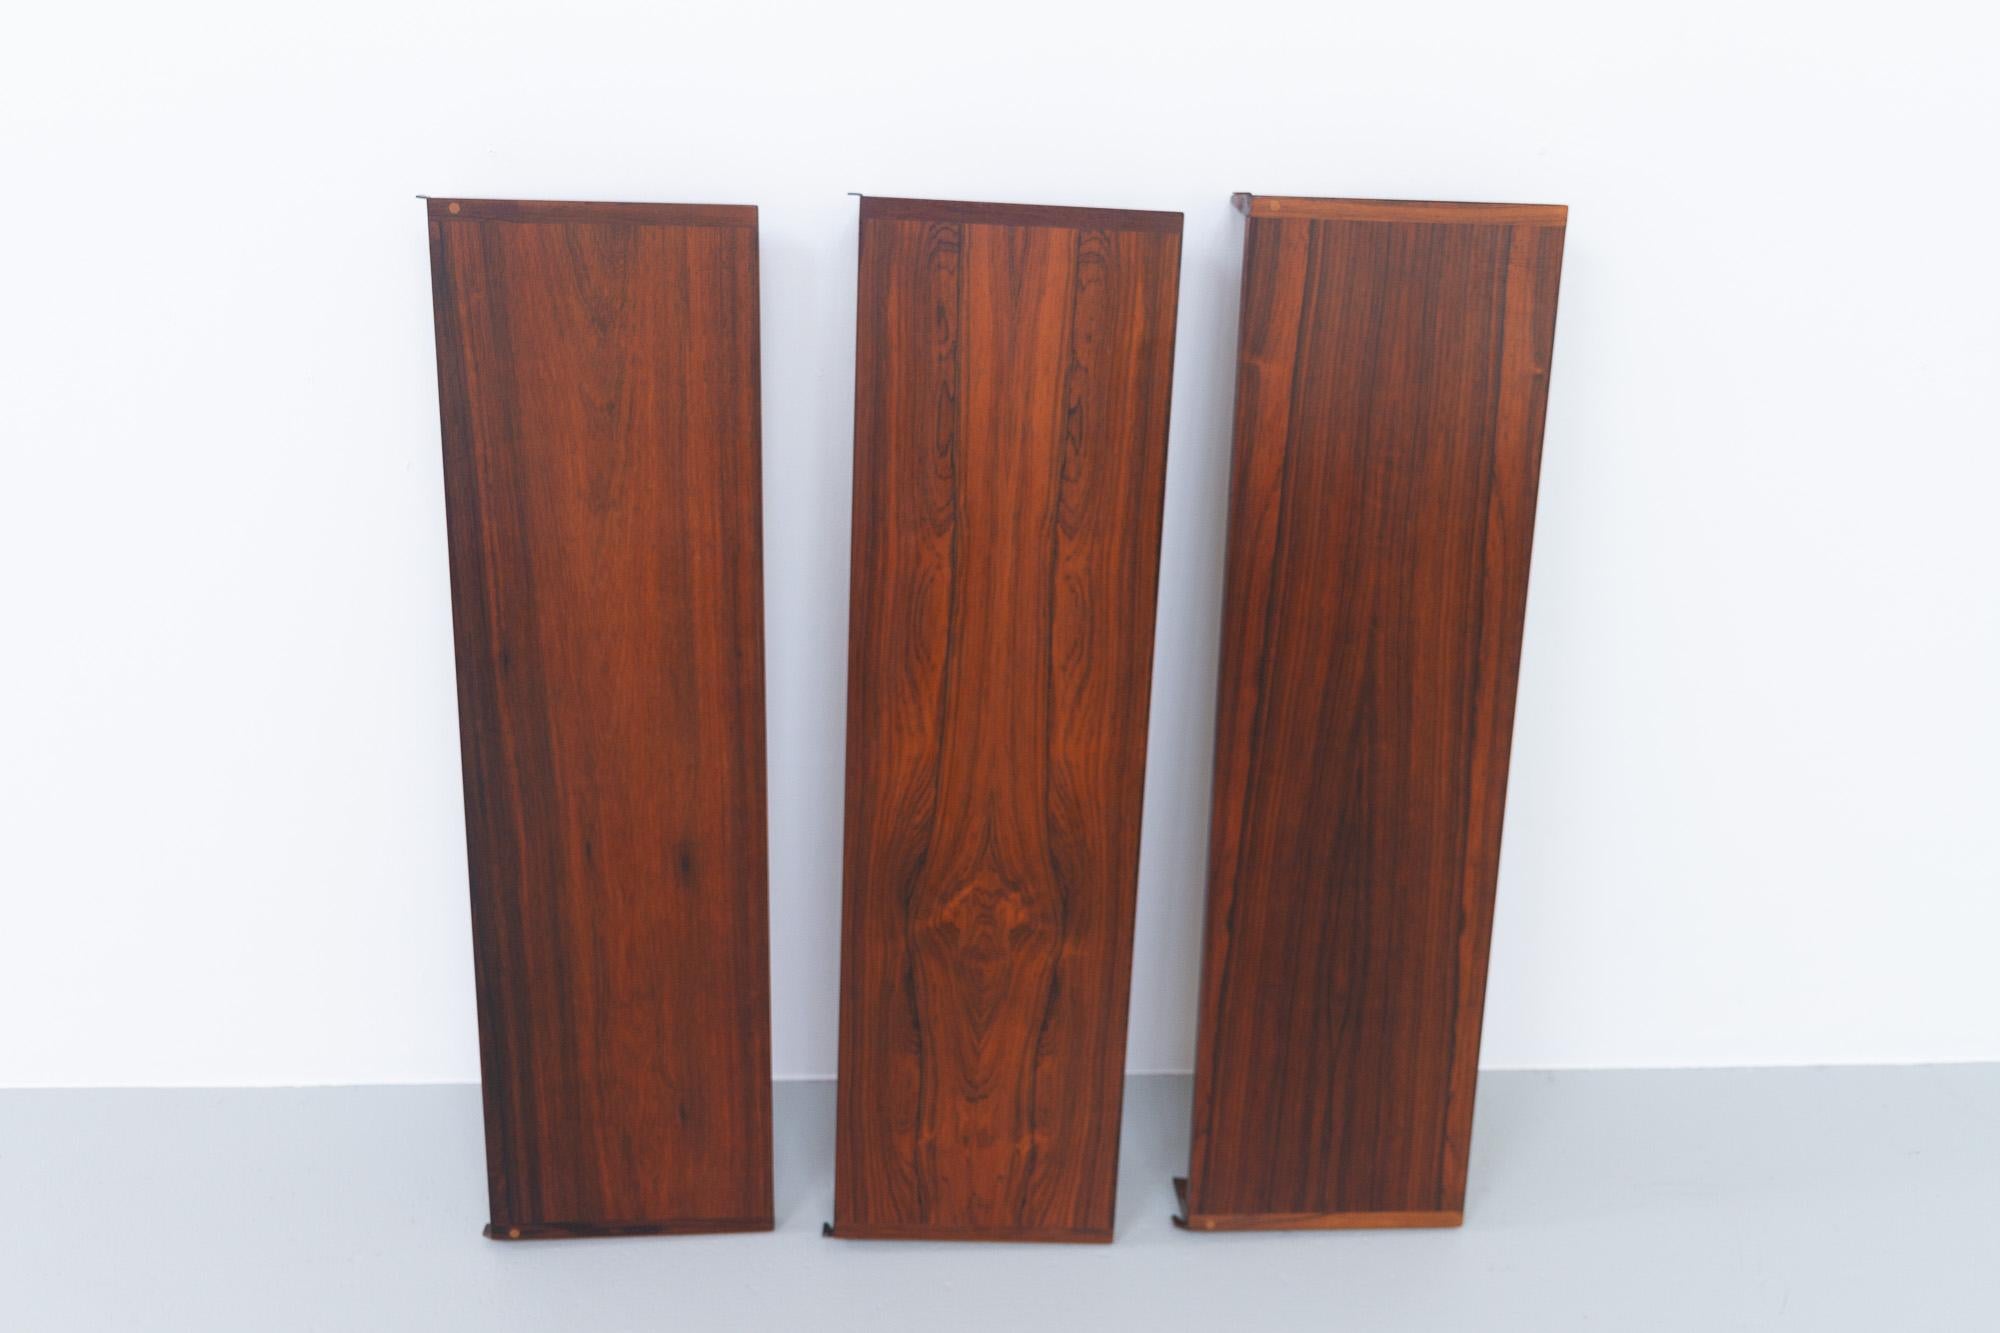 Vintage Danish Rosewood Wall Unit by Kai Kristiansen for FM, 1960s For Sale 28